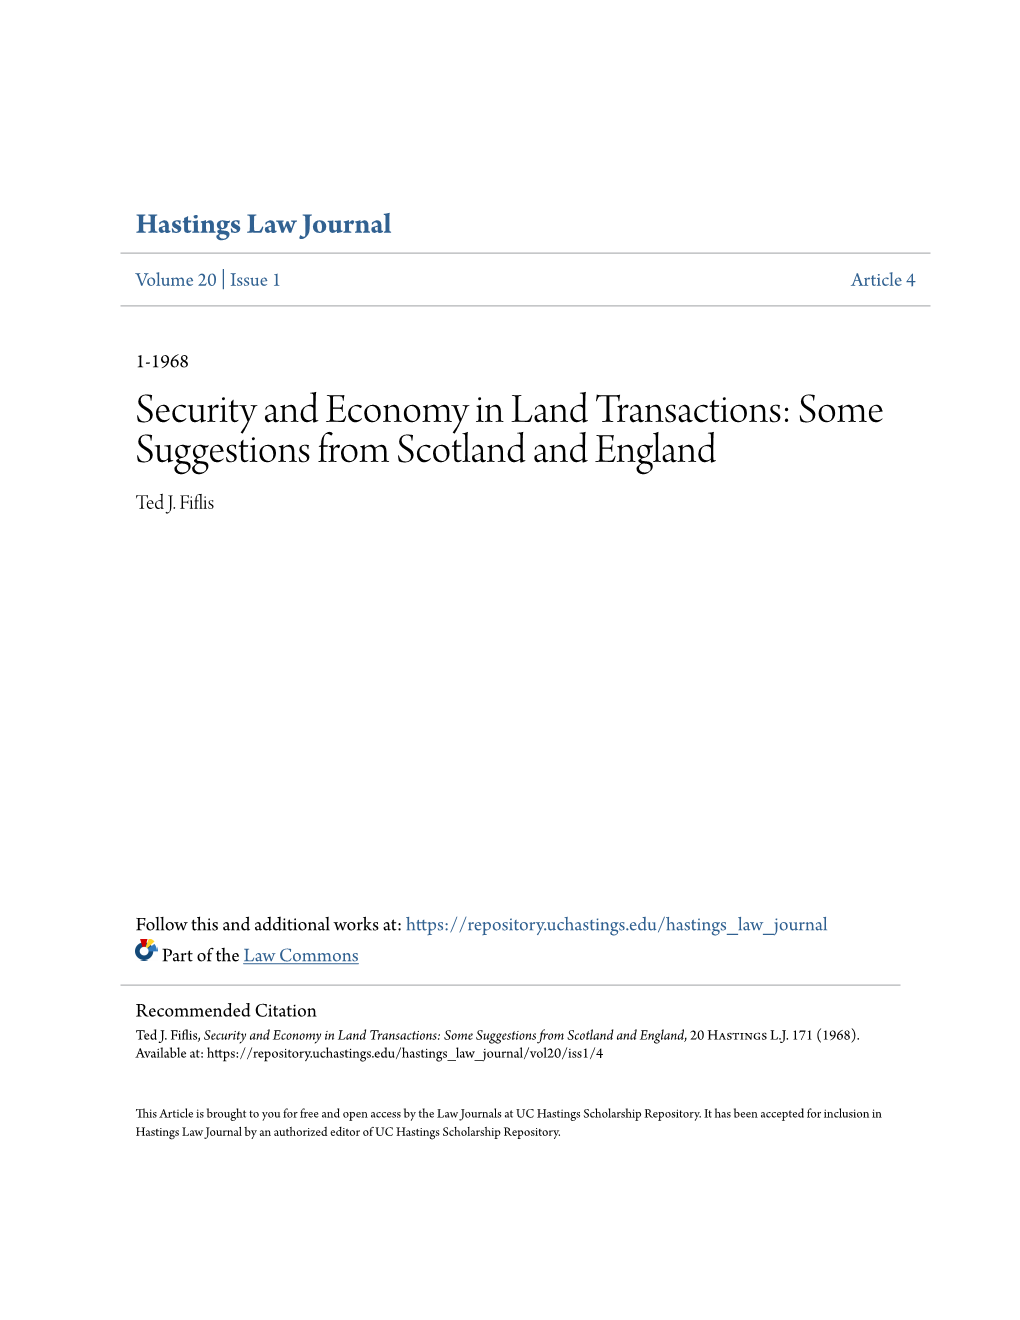 Security and Economy in Land Transactions: Some Suggestions from Scotland and England Ted J